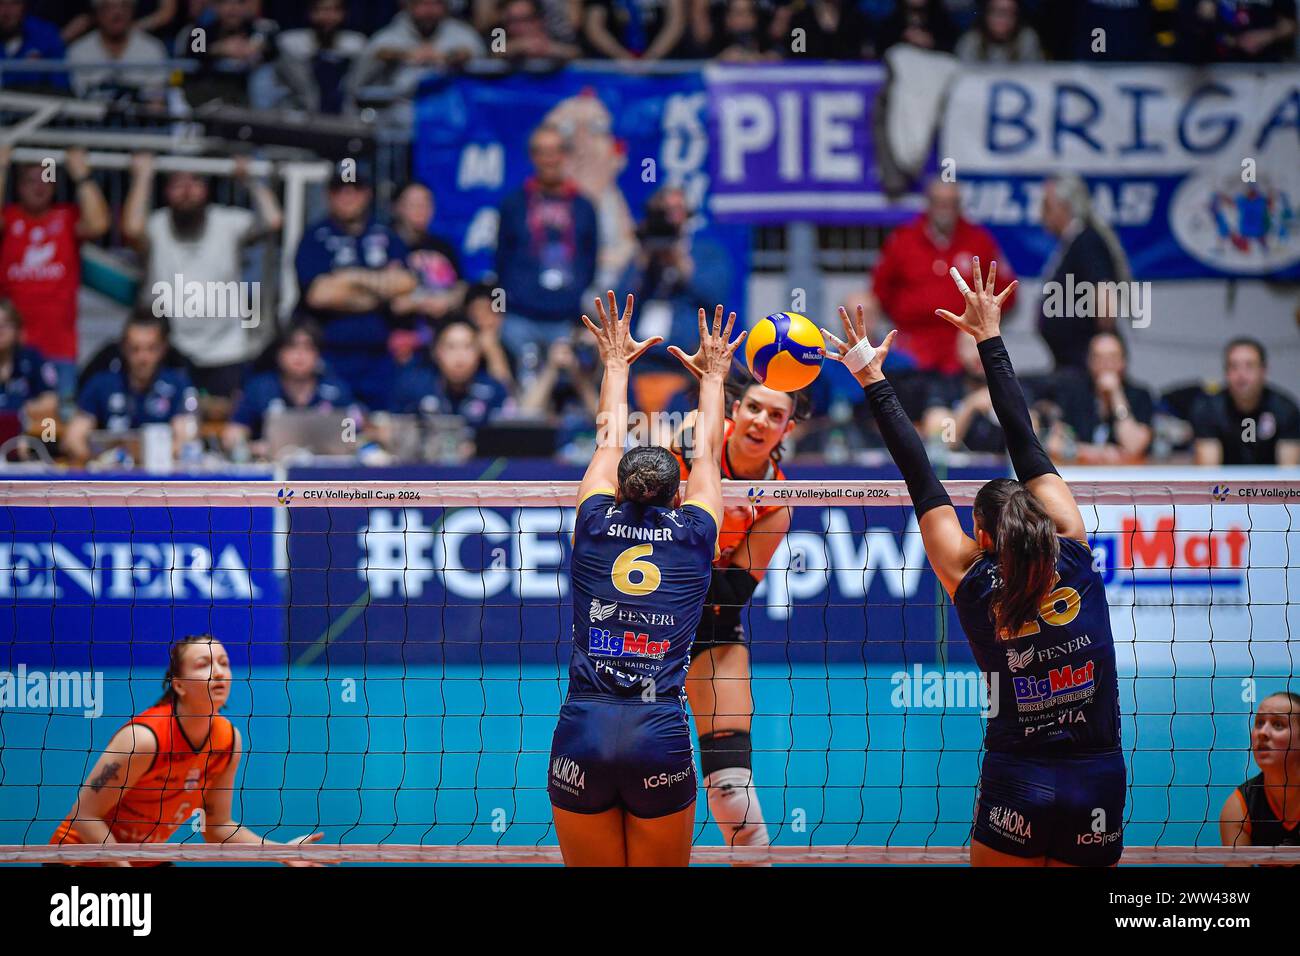 Turin, Italy. 10th Jan, 2024. Final CEV Volleyball Cup 2024 Women Reale Mutua Fenera Chieri '76 (ITA) - Viteos Neuchatel UC (SUI) 3-1 Pala Gianni Asti Turin Haymes Madeline 4 (Viteos Neuchatel) in action during Final CEV Champions League match between Reale Mutua Fenera Chieri '76 and Viteos Neuchatel UC at Pala Gianni Asti in Turin, Italy 20 March 2024 (Photo by Tonello Abozzi/Pacific Press) Credit: Pacific Press Media Production Corp./Alamy Live News Stock Photo